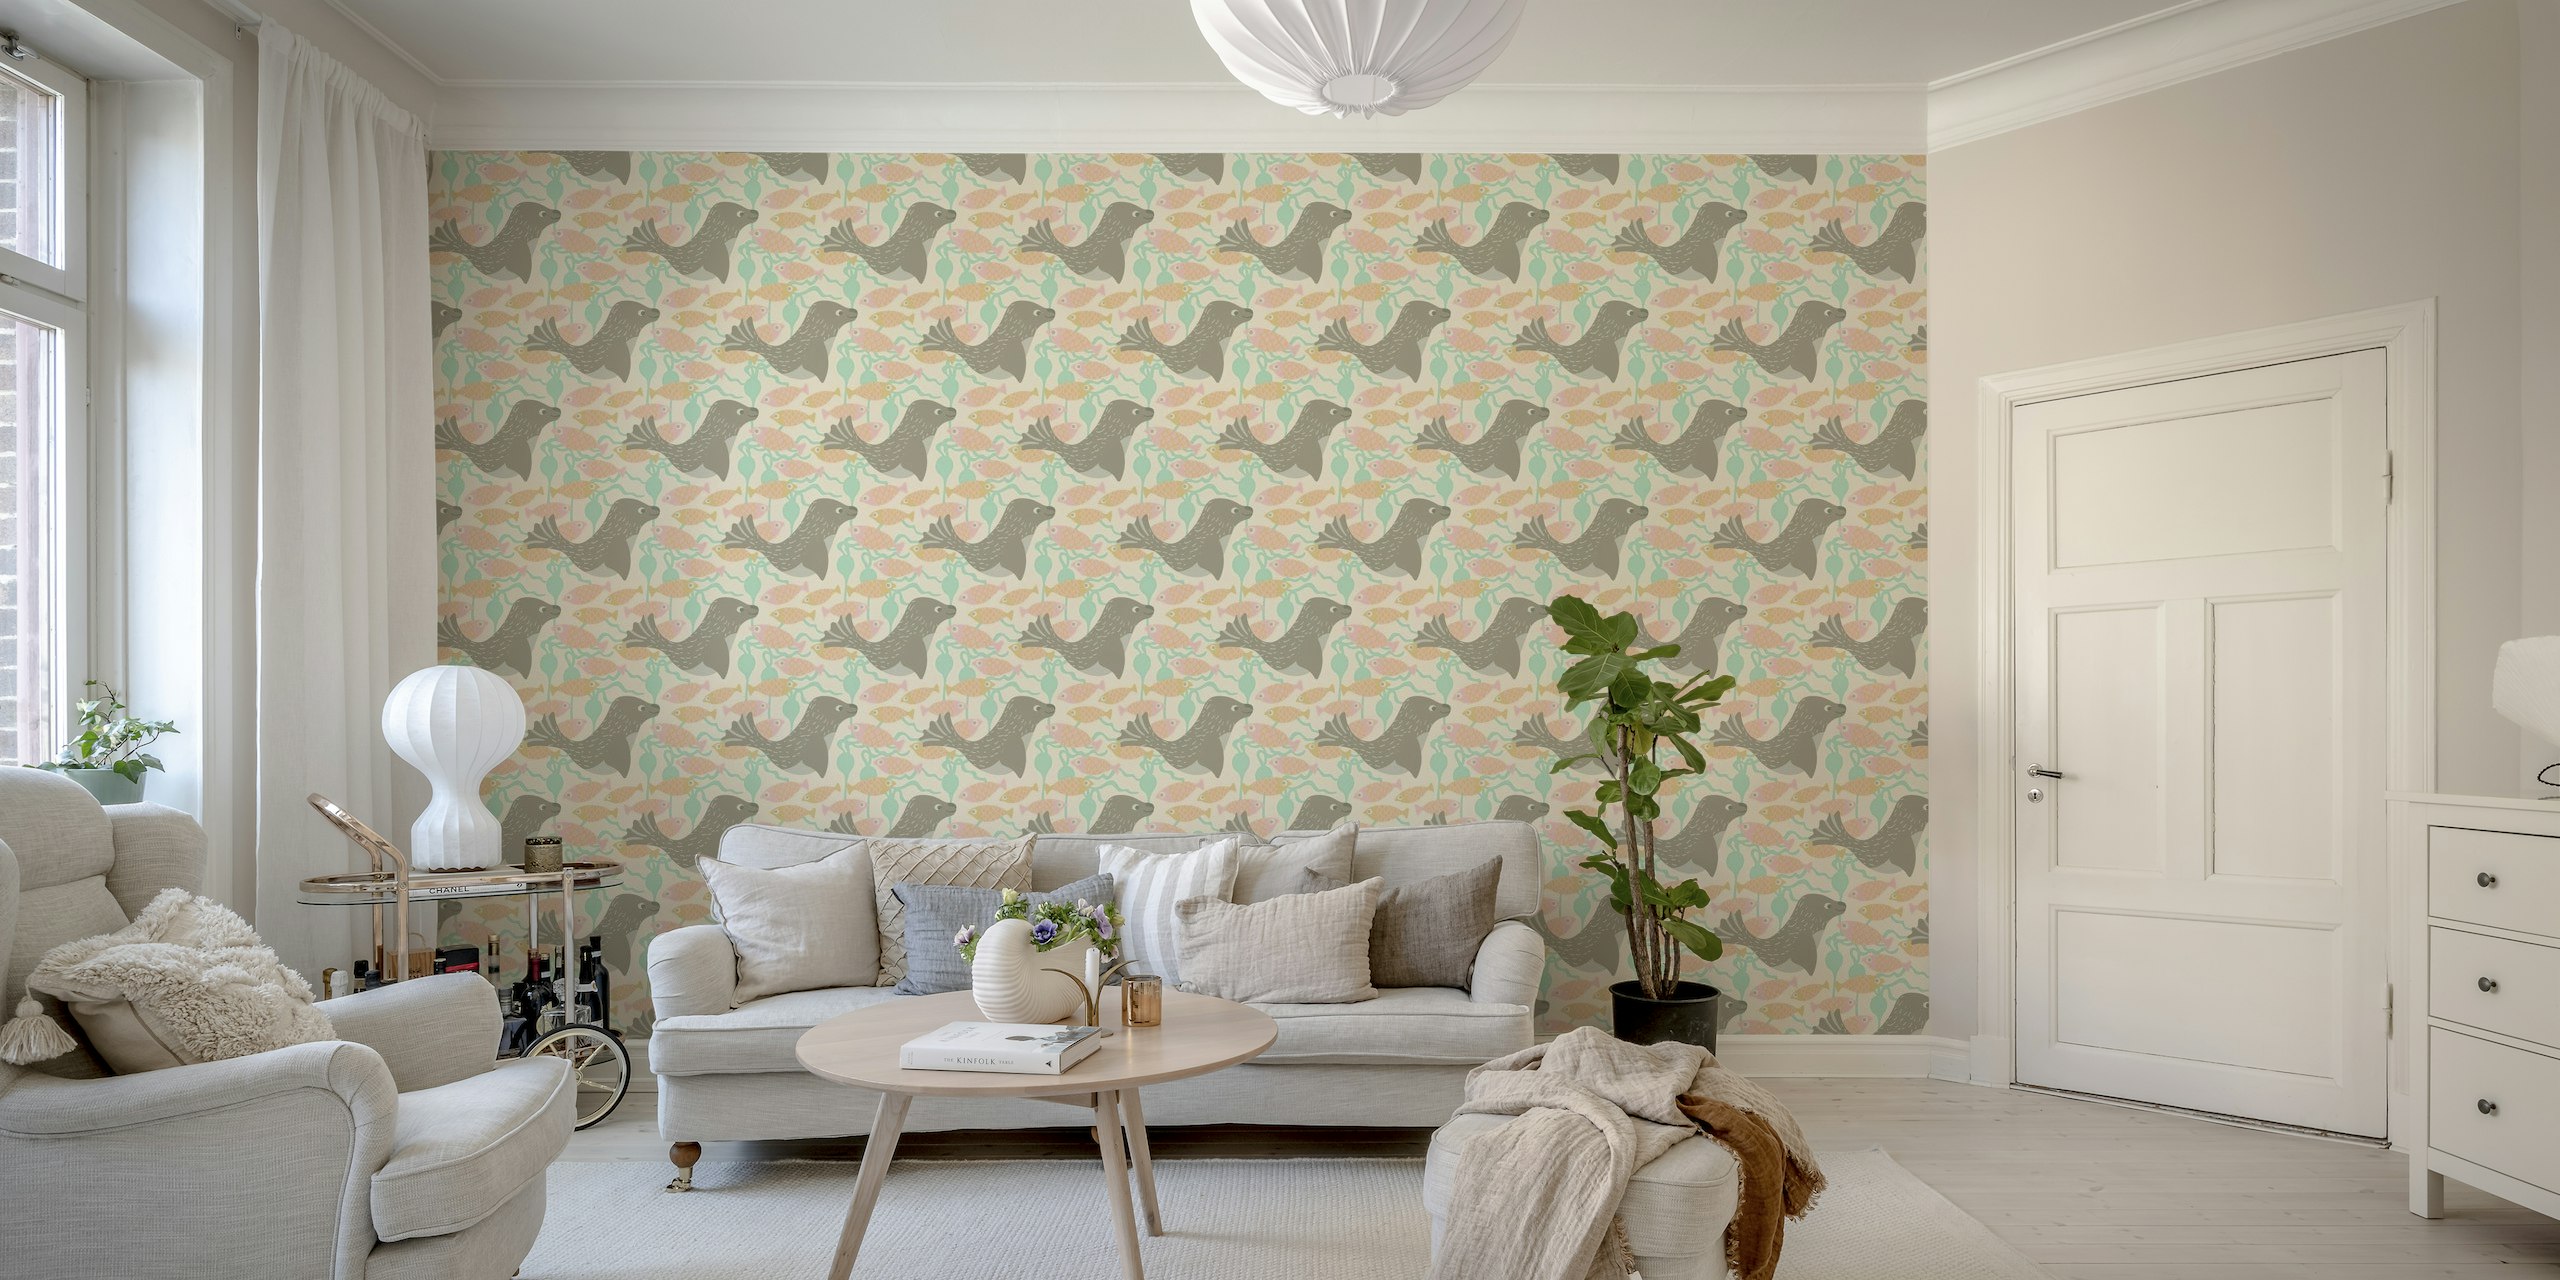 Illustrative wall mural with friendly seals, fishes, and seaweed in pastel colors